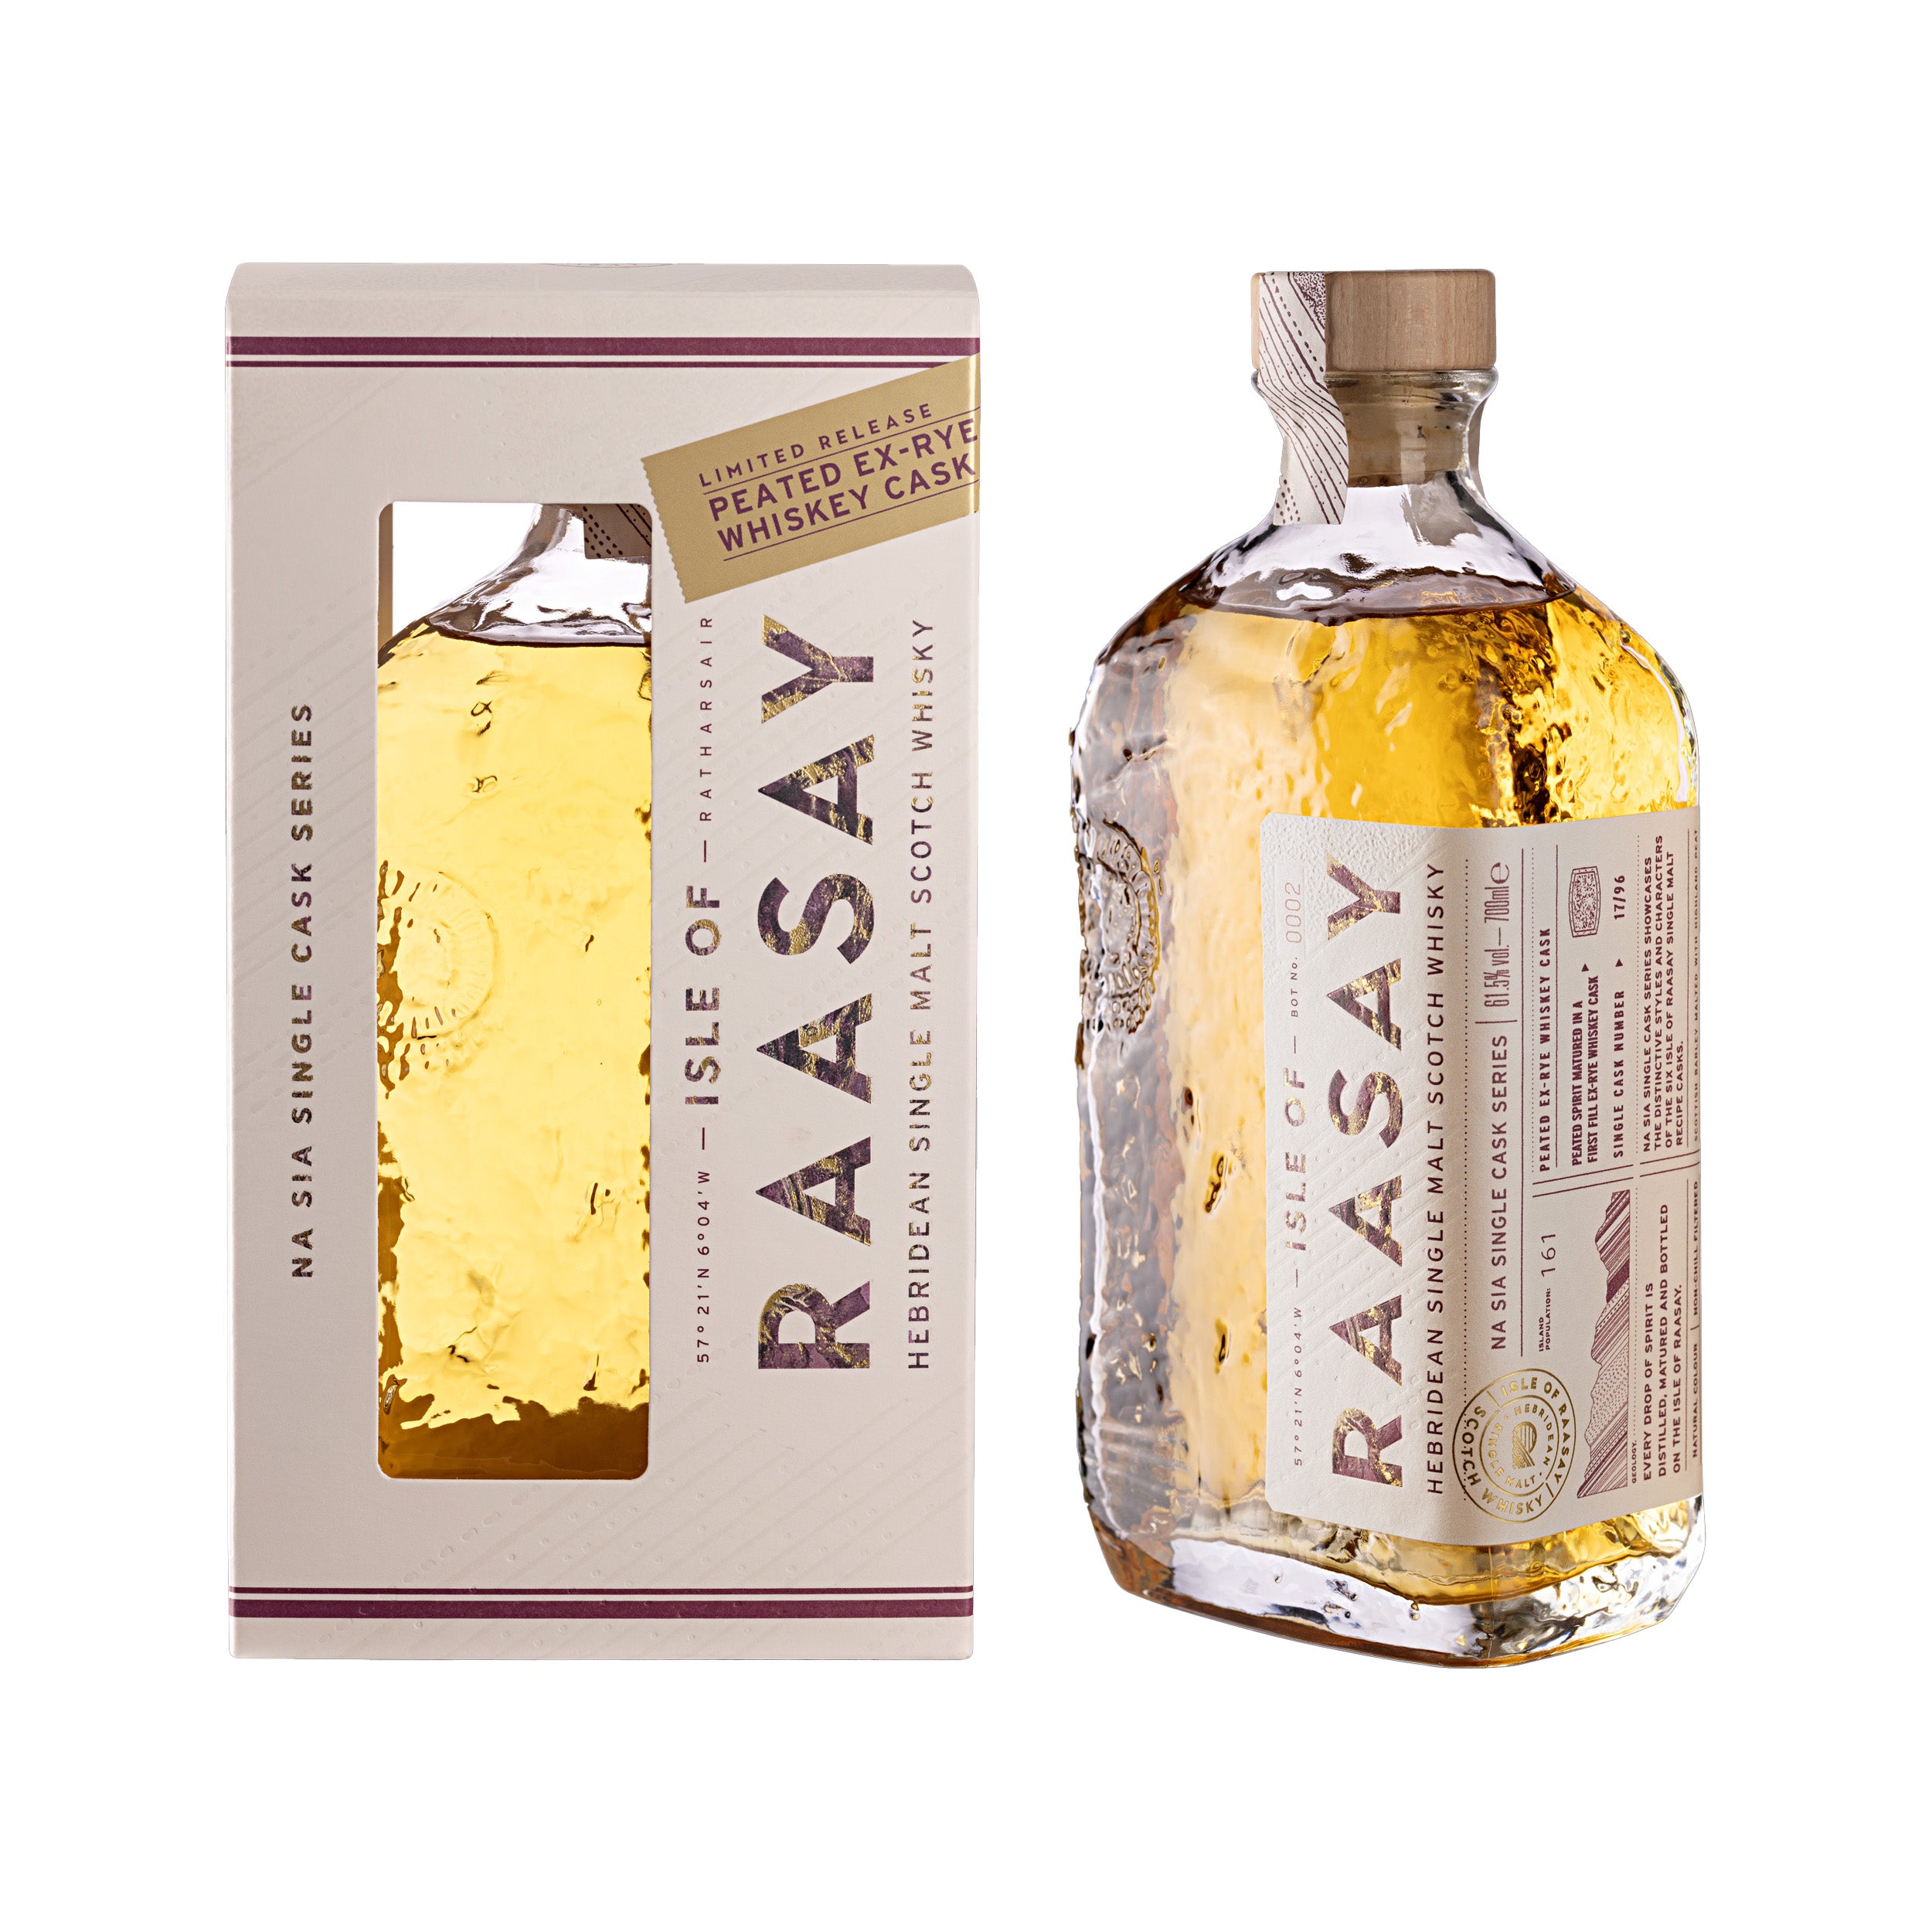 Raasay Distillery Ex-Woodford Reserve Rye Unpeated Cask Strength Whiskey